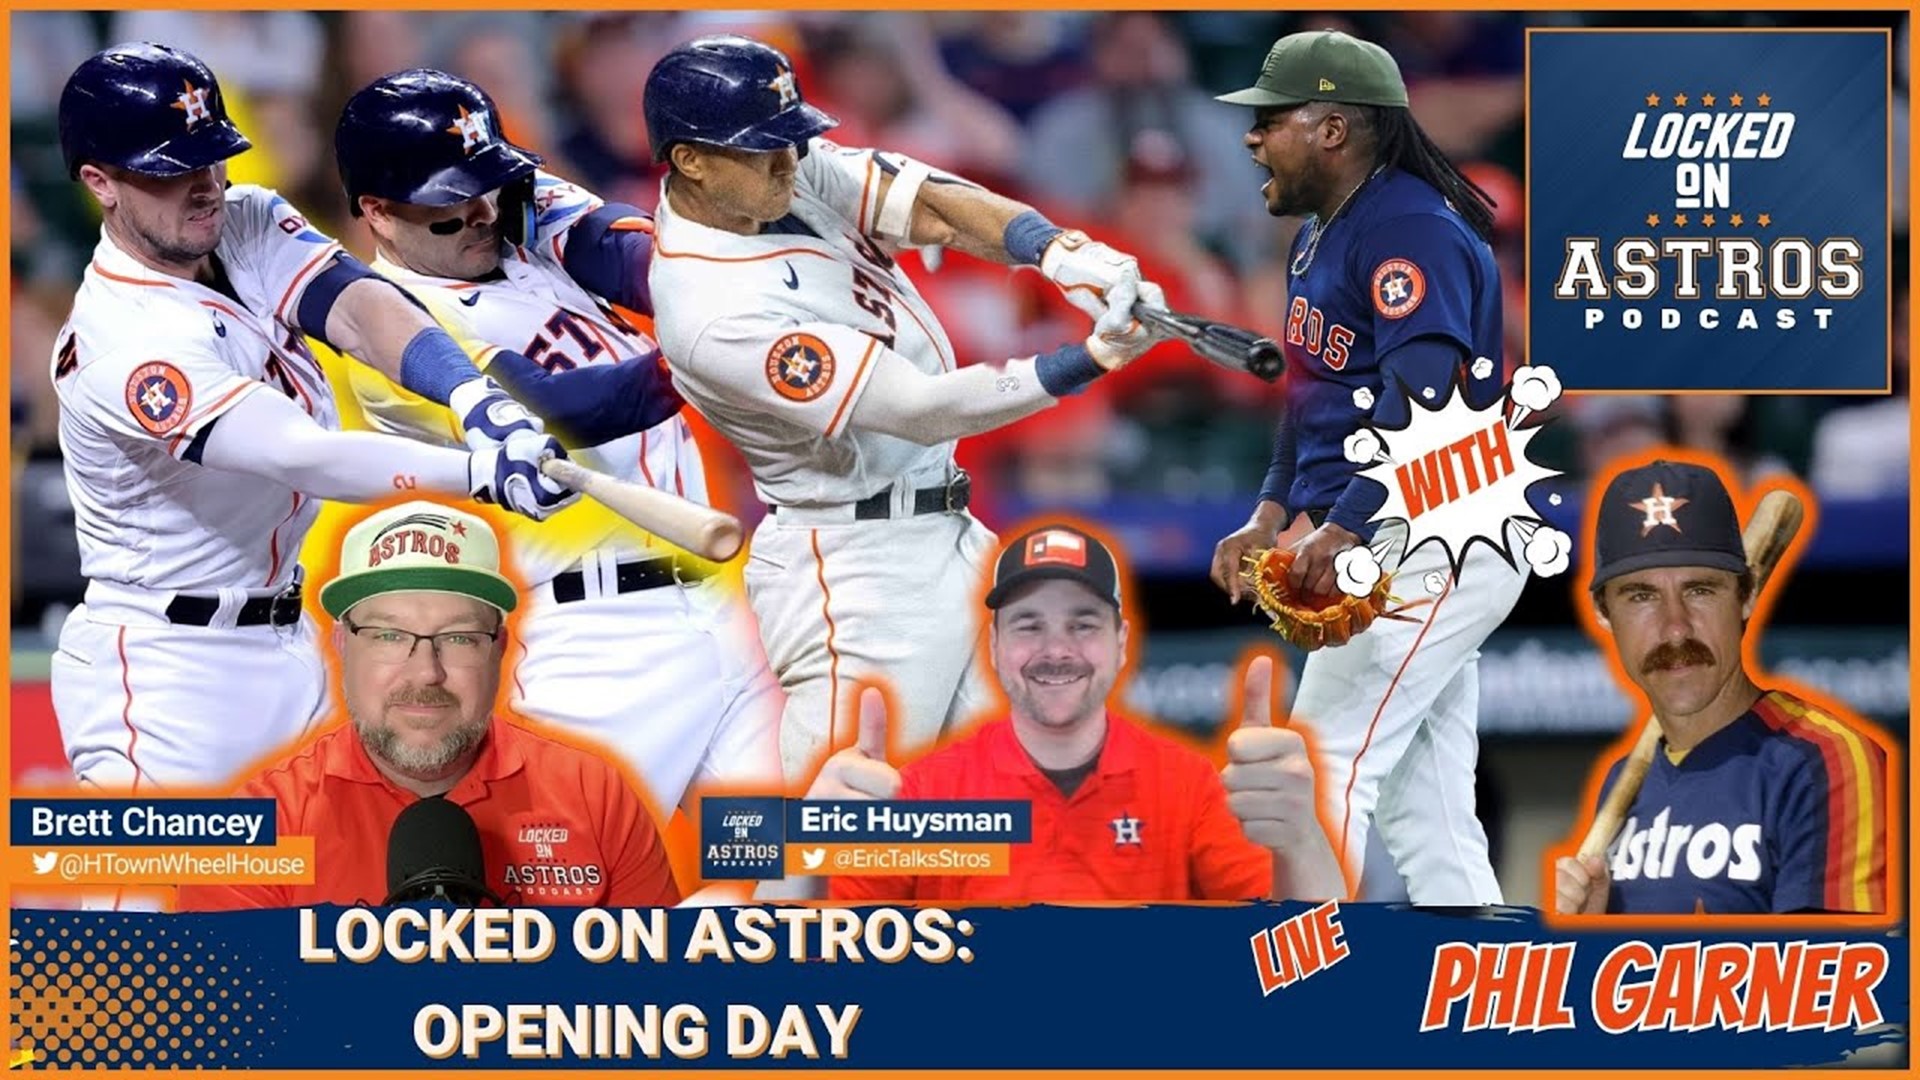 Astros Phil Garner Joins the Show on the Eve of Opening Day!